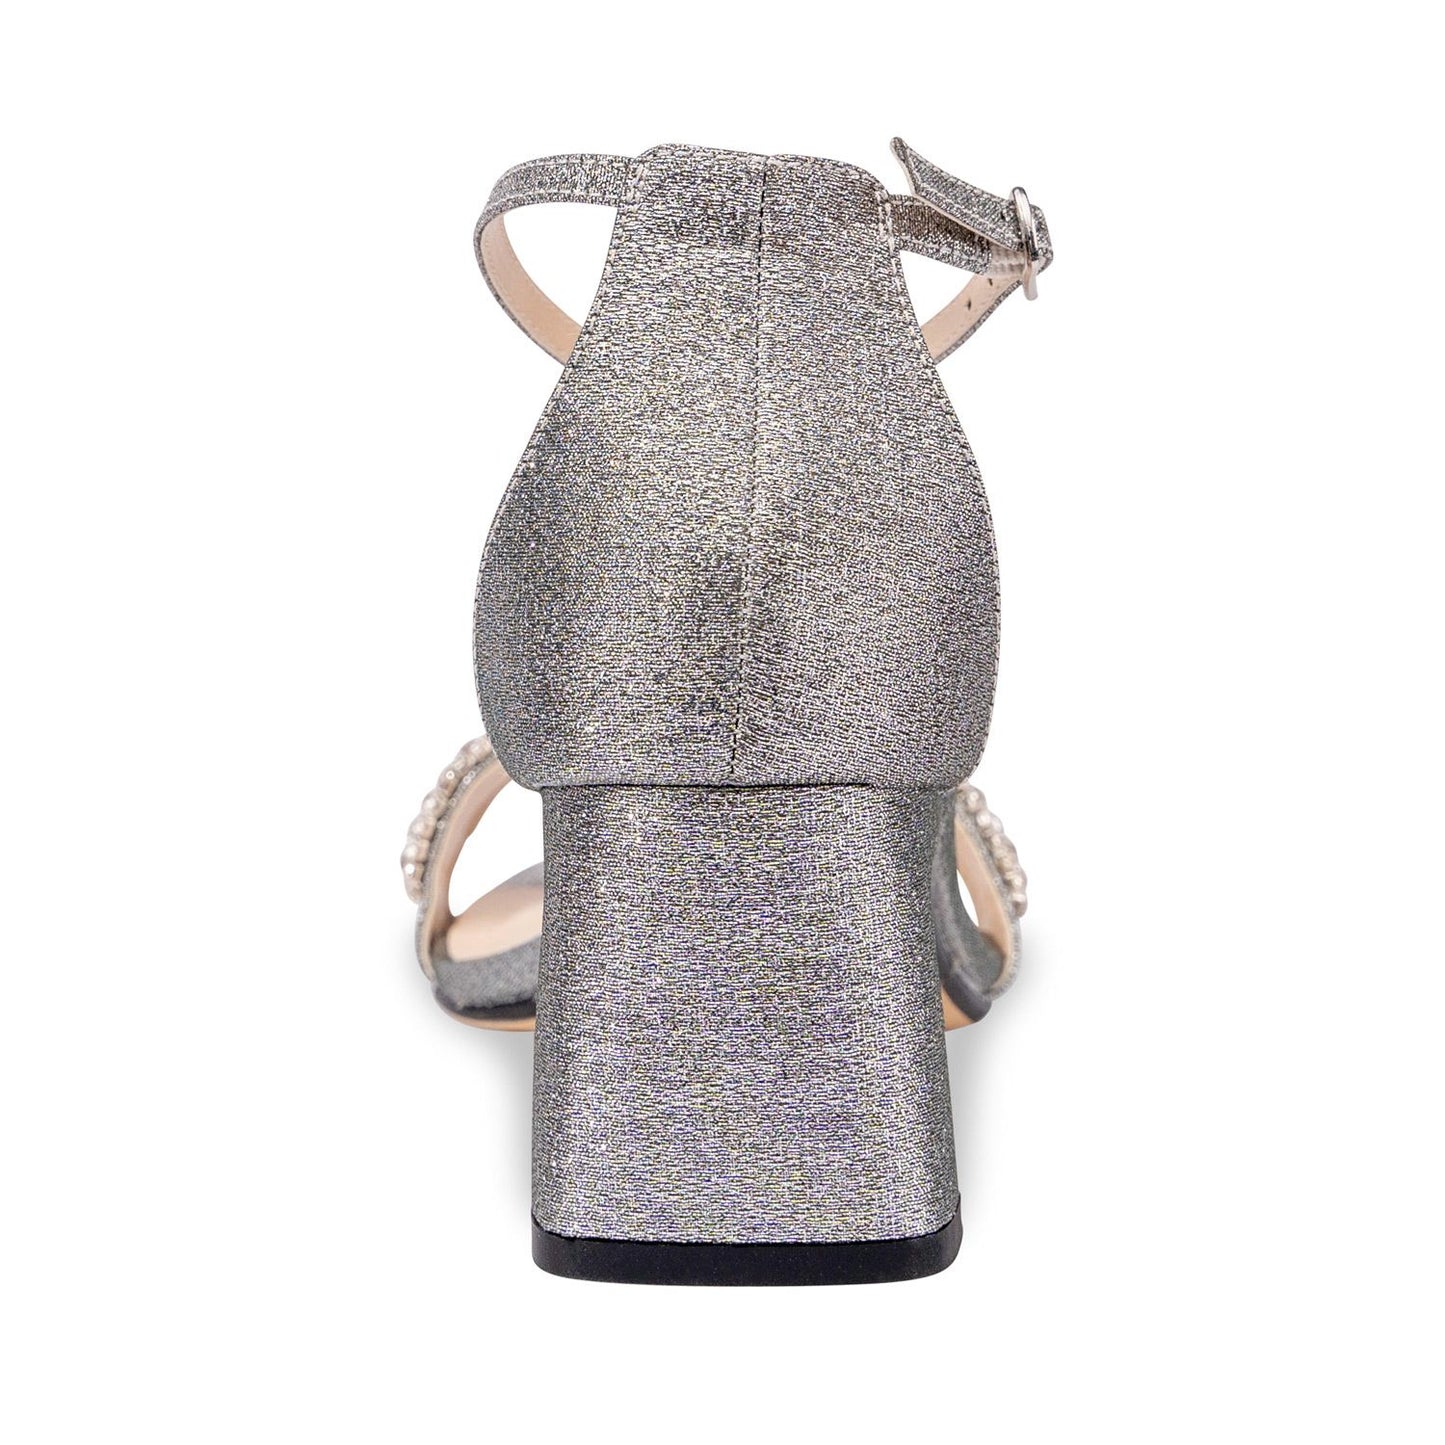 Pewter 2.25 inch heal with rhinestone detail and ankle strap